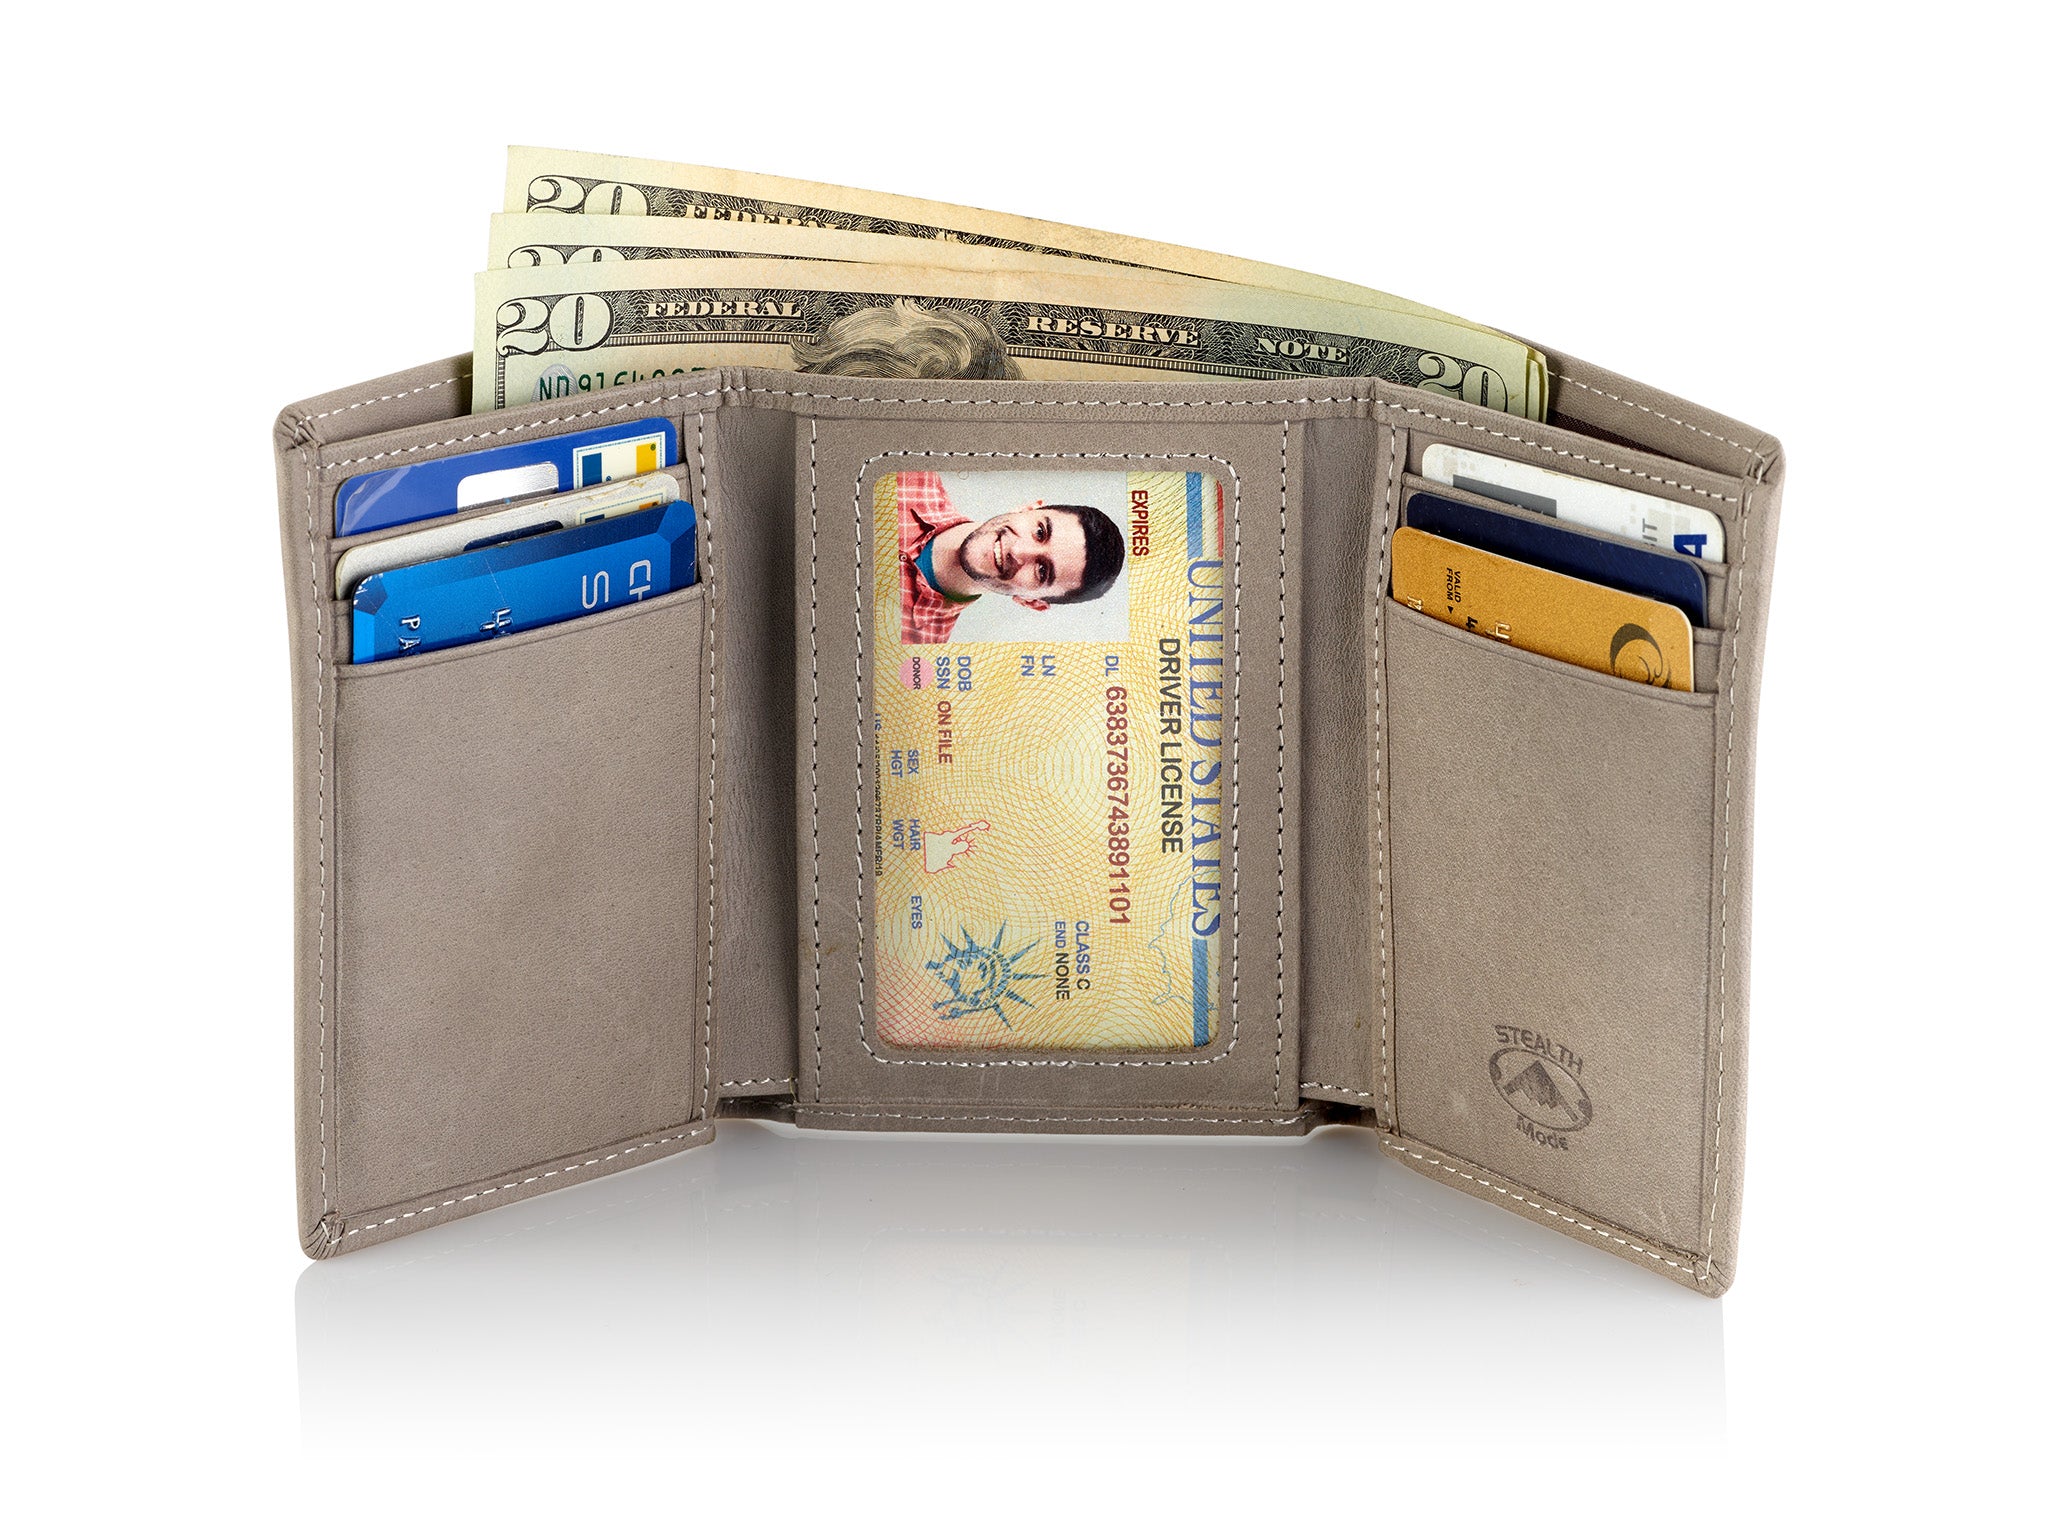 Grey Trifold Leather Wallet With RFID Blocking and ID Window